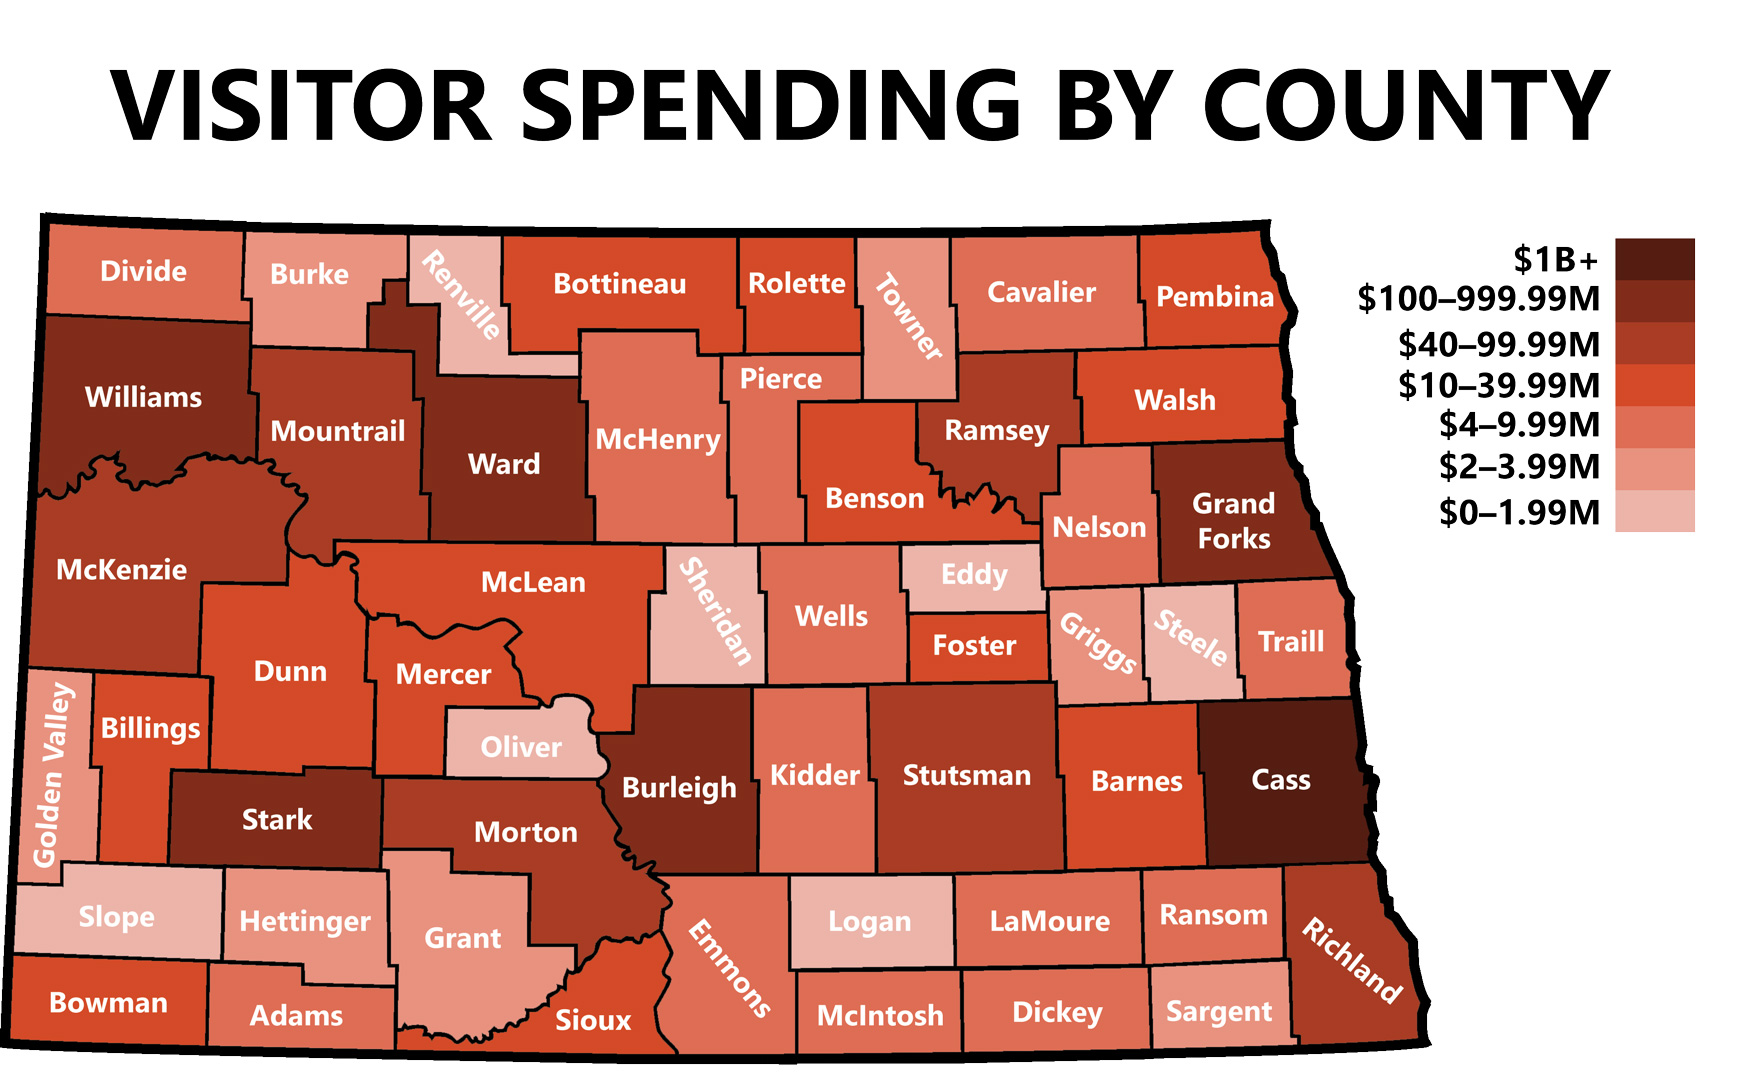 Visitor Spending by County